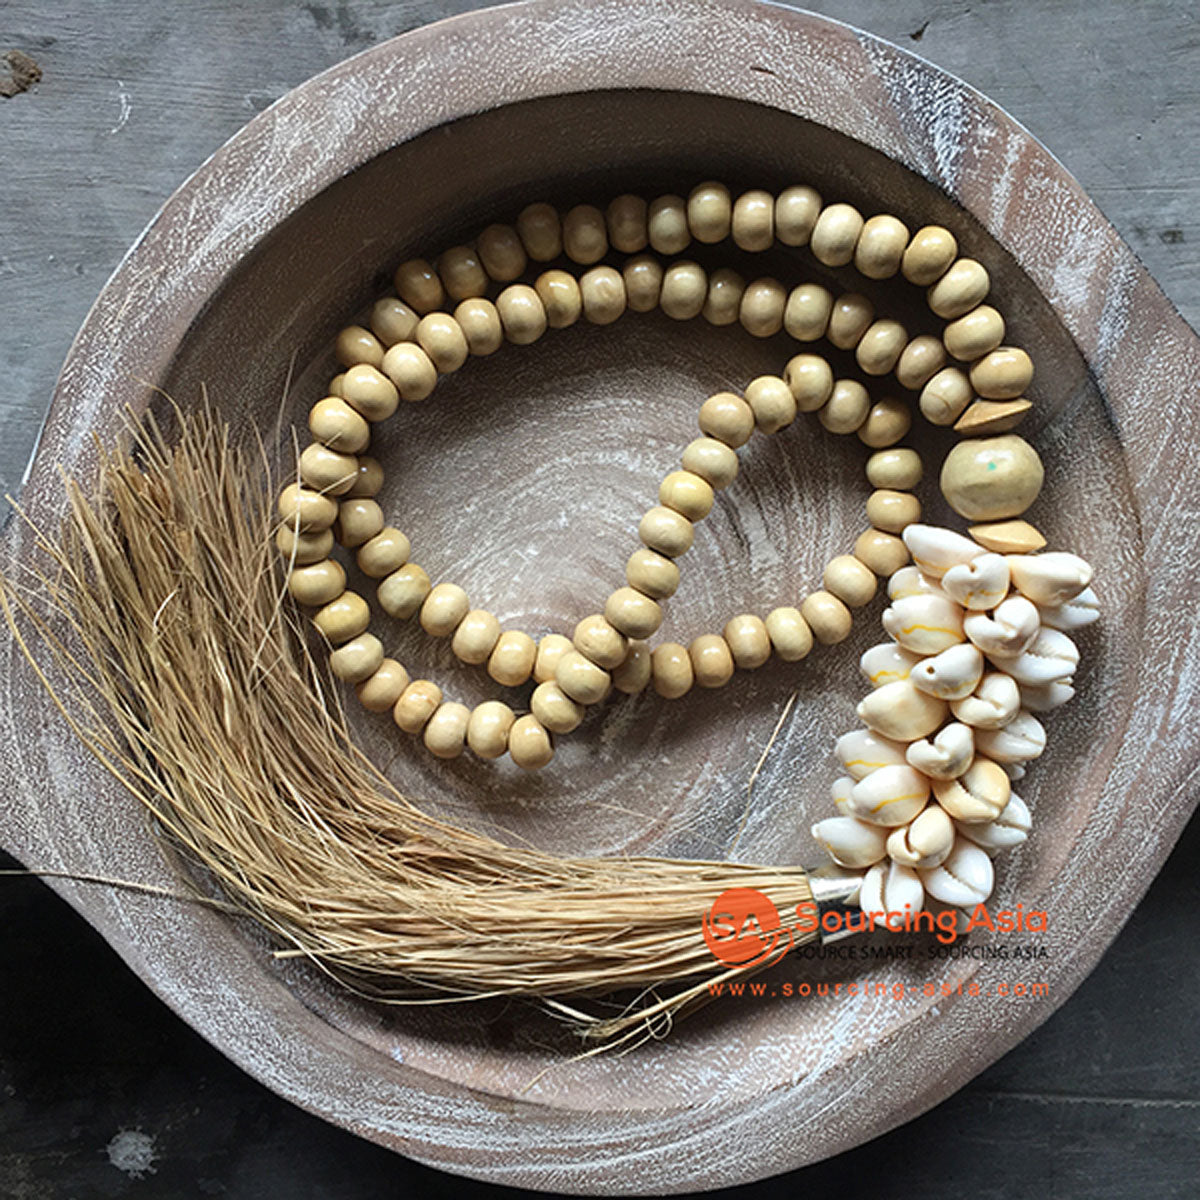 SHL047-25 NATURAL TIMBER BEADS AND COWRIE SHELL DECORATIVE TASSEL WITH RAFFIA FRINGE